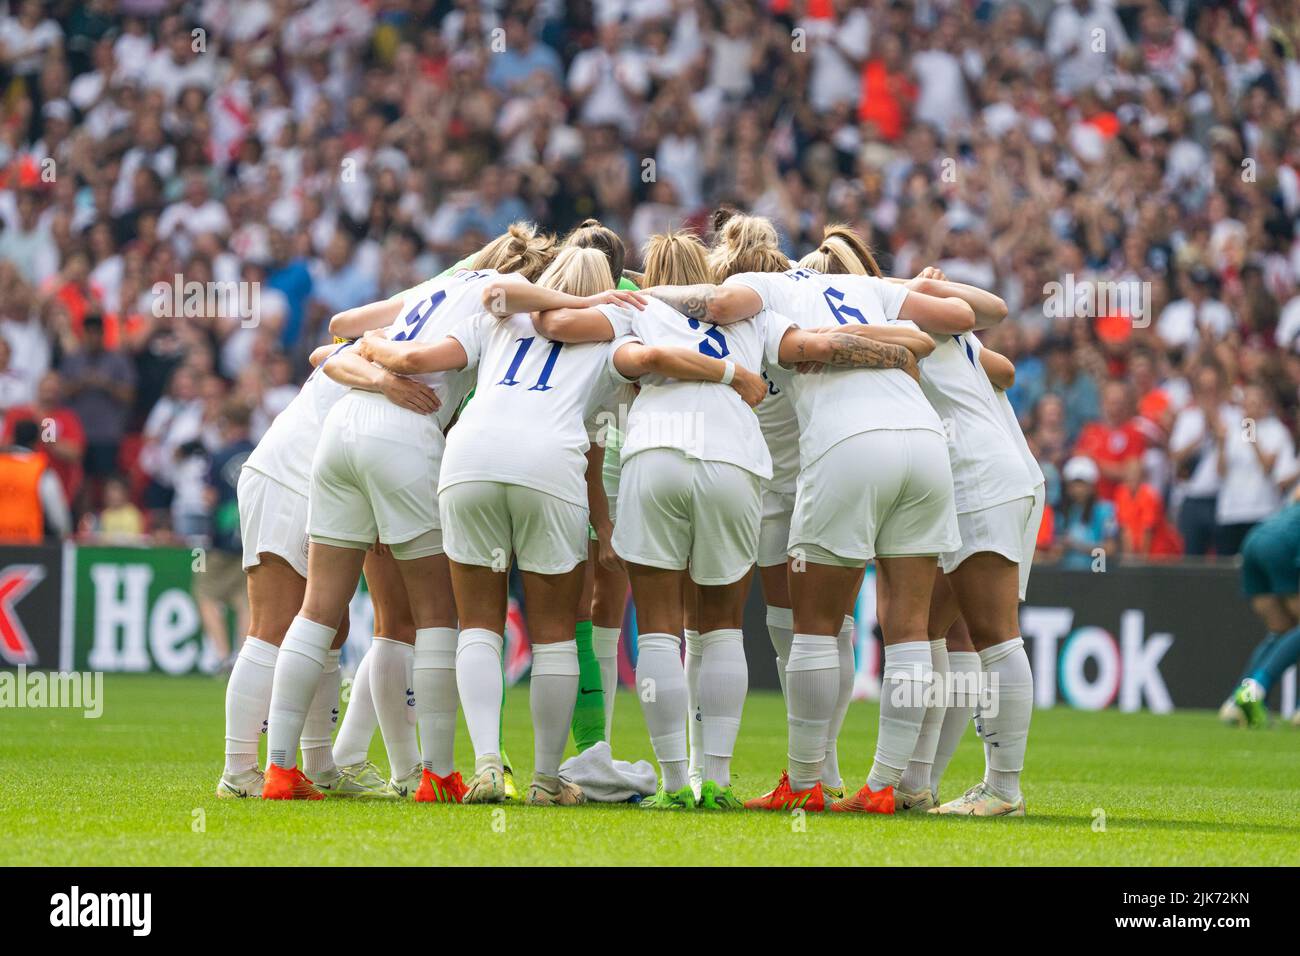 London, UK. 31st July, 2022. England team huddle during the UEFA Womens Euro 2022 Final match between England and Germany at the Wembley Stadium in London, England. (Foto: Sam Mallia/Sports Press Photo/C - ONE HOUR DEADLINE - ONLY ACTIVATE FTP IF IMAGES LESS THAN ONE HOUR OLD - Alamy) Credit: SPP Sport Press Photo. /Alamy Live News Stock Photo